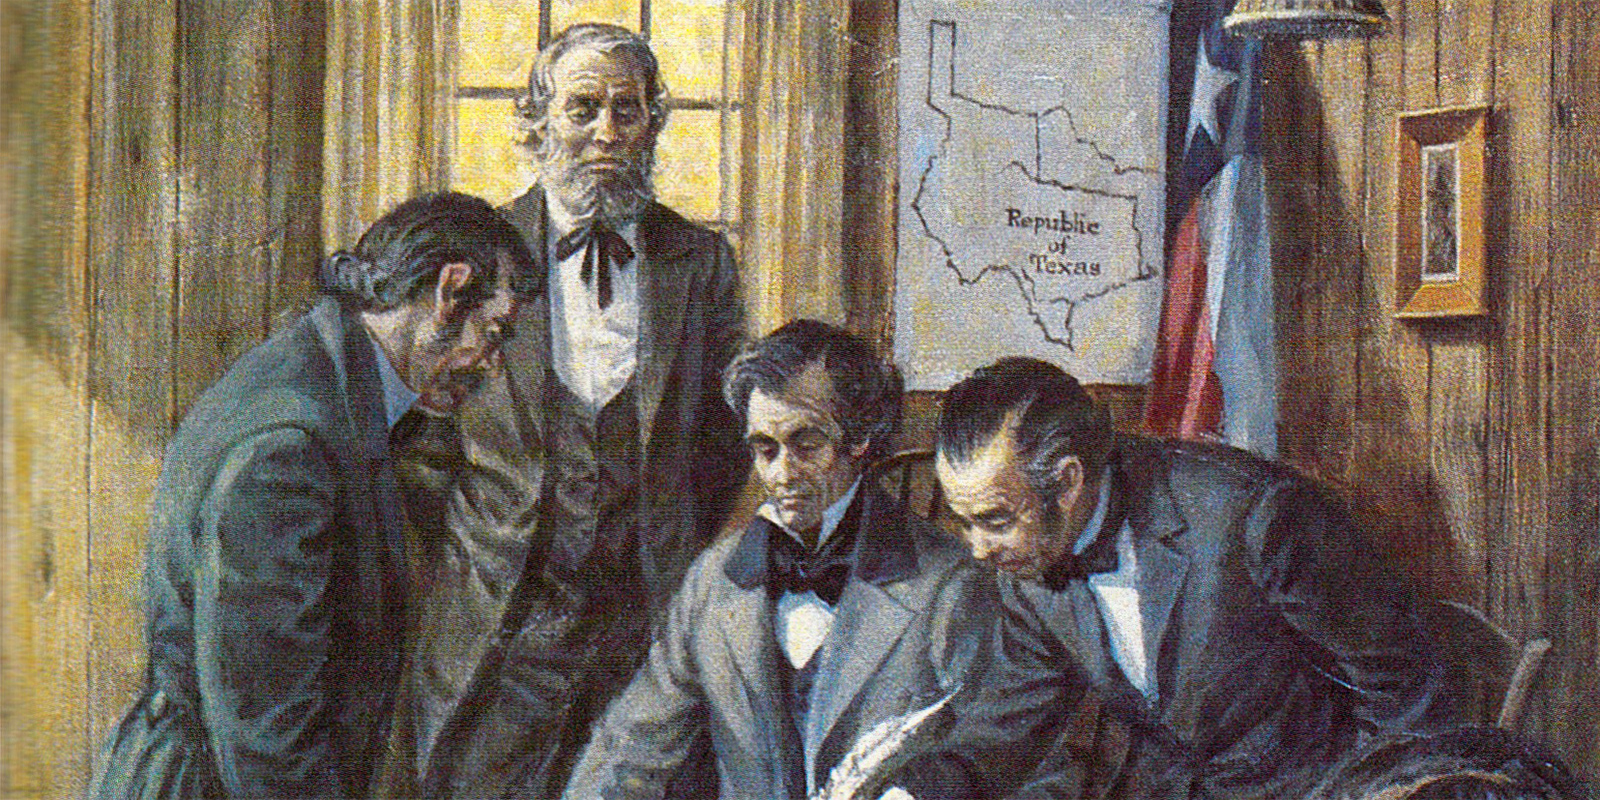 Baylor's founding fathers -- Judge Baylor (standing), James Huckins (center) and William Tryon (right)